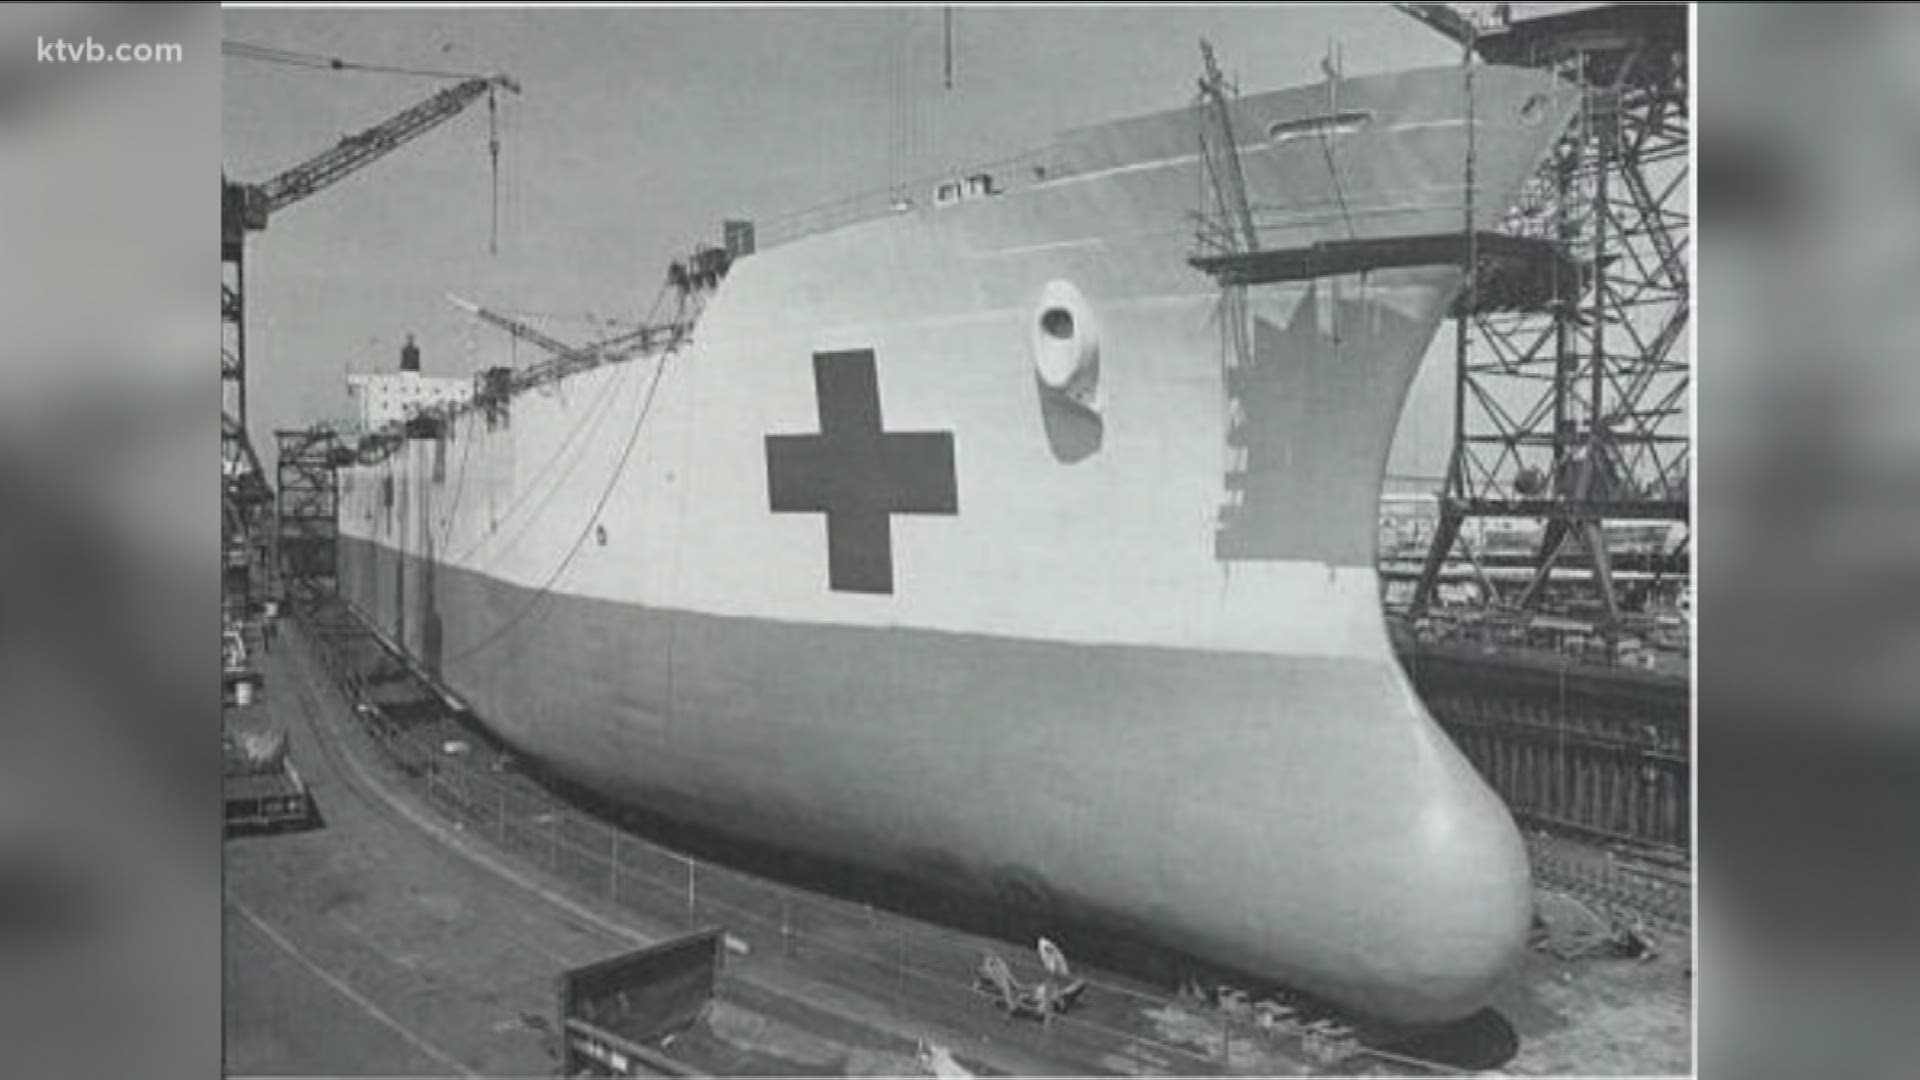 Navy Medical ships that were sent from their home base in support of the COVID crisis are actually transformed oil tankers that were born in Boise.